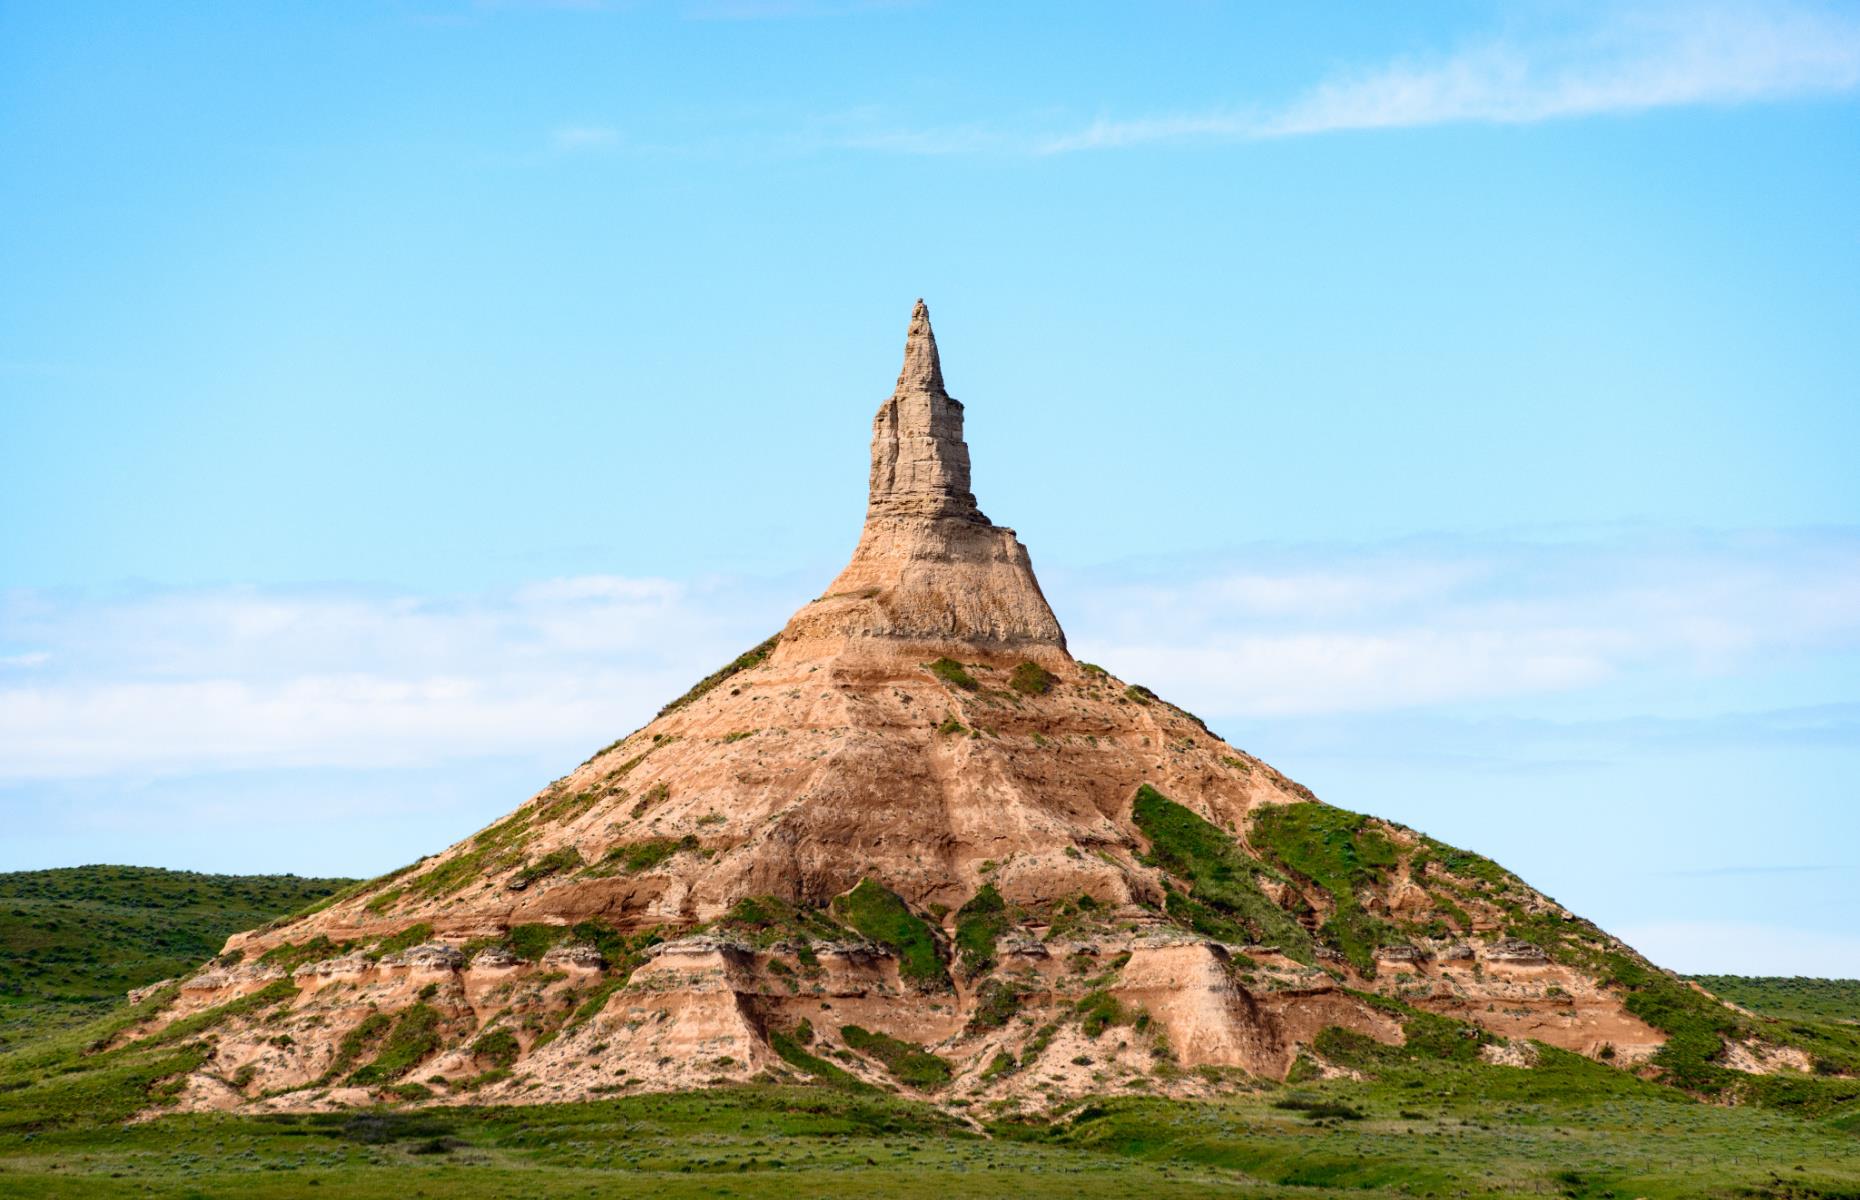 <p>Another natural landmark that helped point pioneer migrants in the right direction, <a href="https://www.nps.gov/nr/travel/scotts_bluff/chimney_rock.html">Chimney Rock</a> was a beacon for travelers on the Oregon, California and Mormon trails. In fact, it’s mentioned repeatedly in the diaries of pioneers headed westward. Today the rock remains as it always has – surrounded by plains without any modern developments in sight.</p>